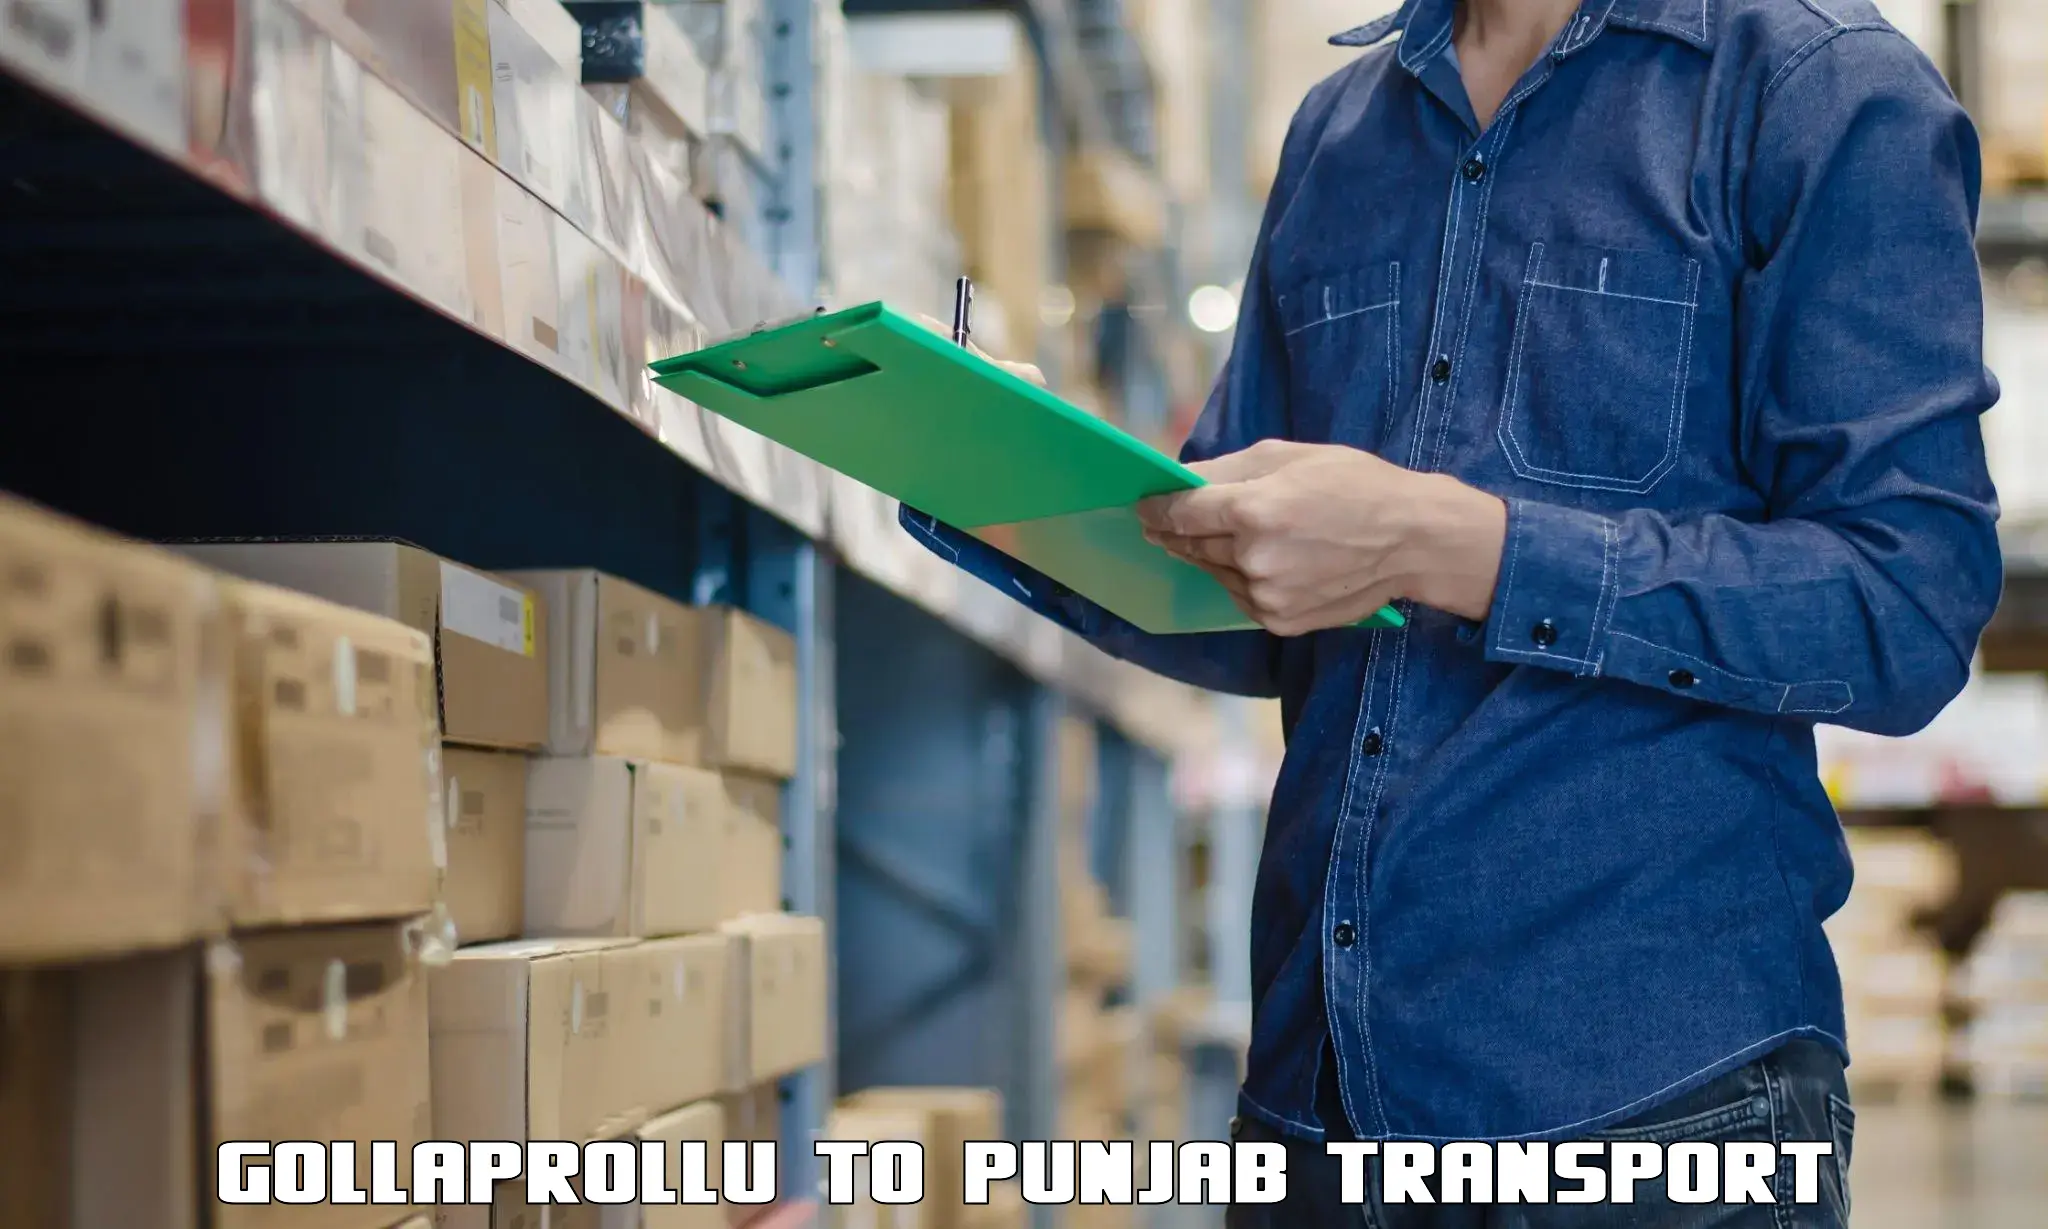 Vehicle transport services Gollaprollu to Ropar